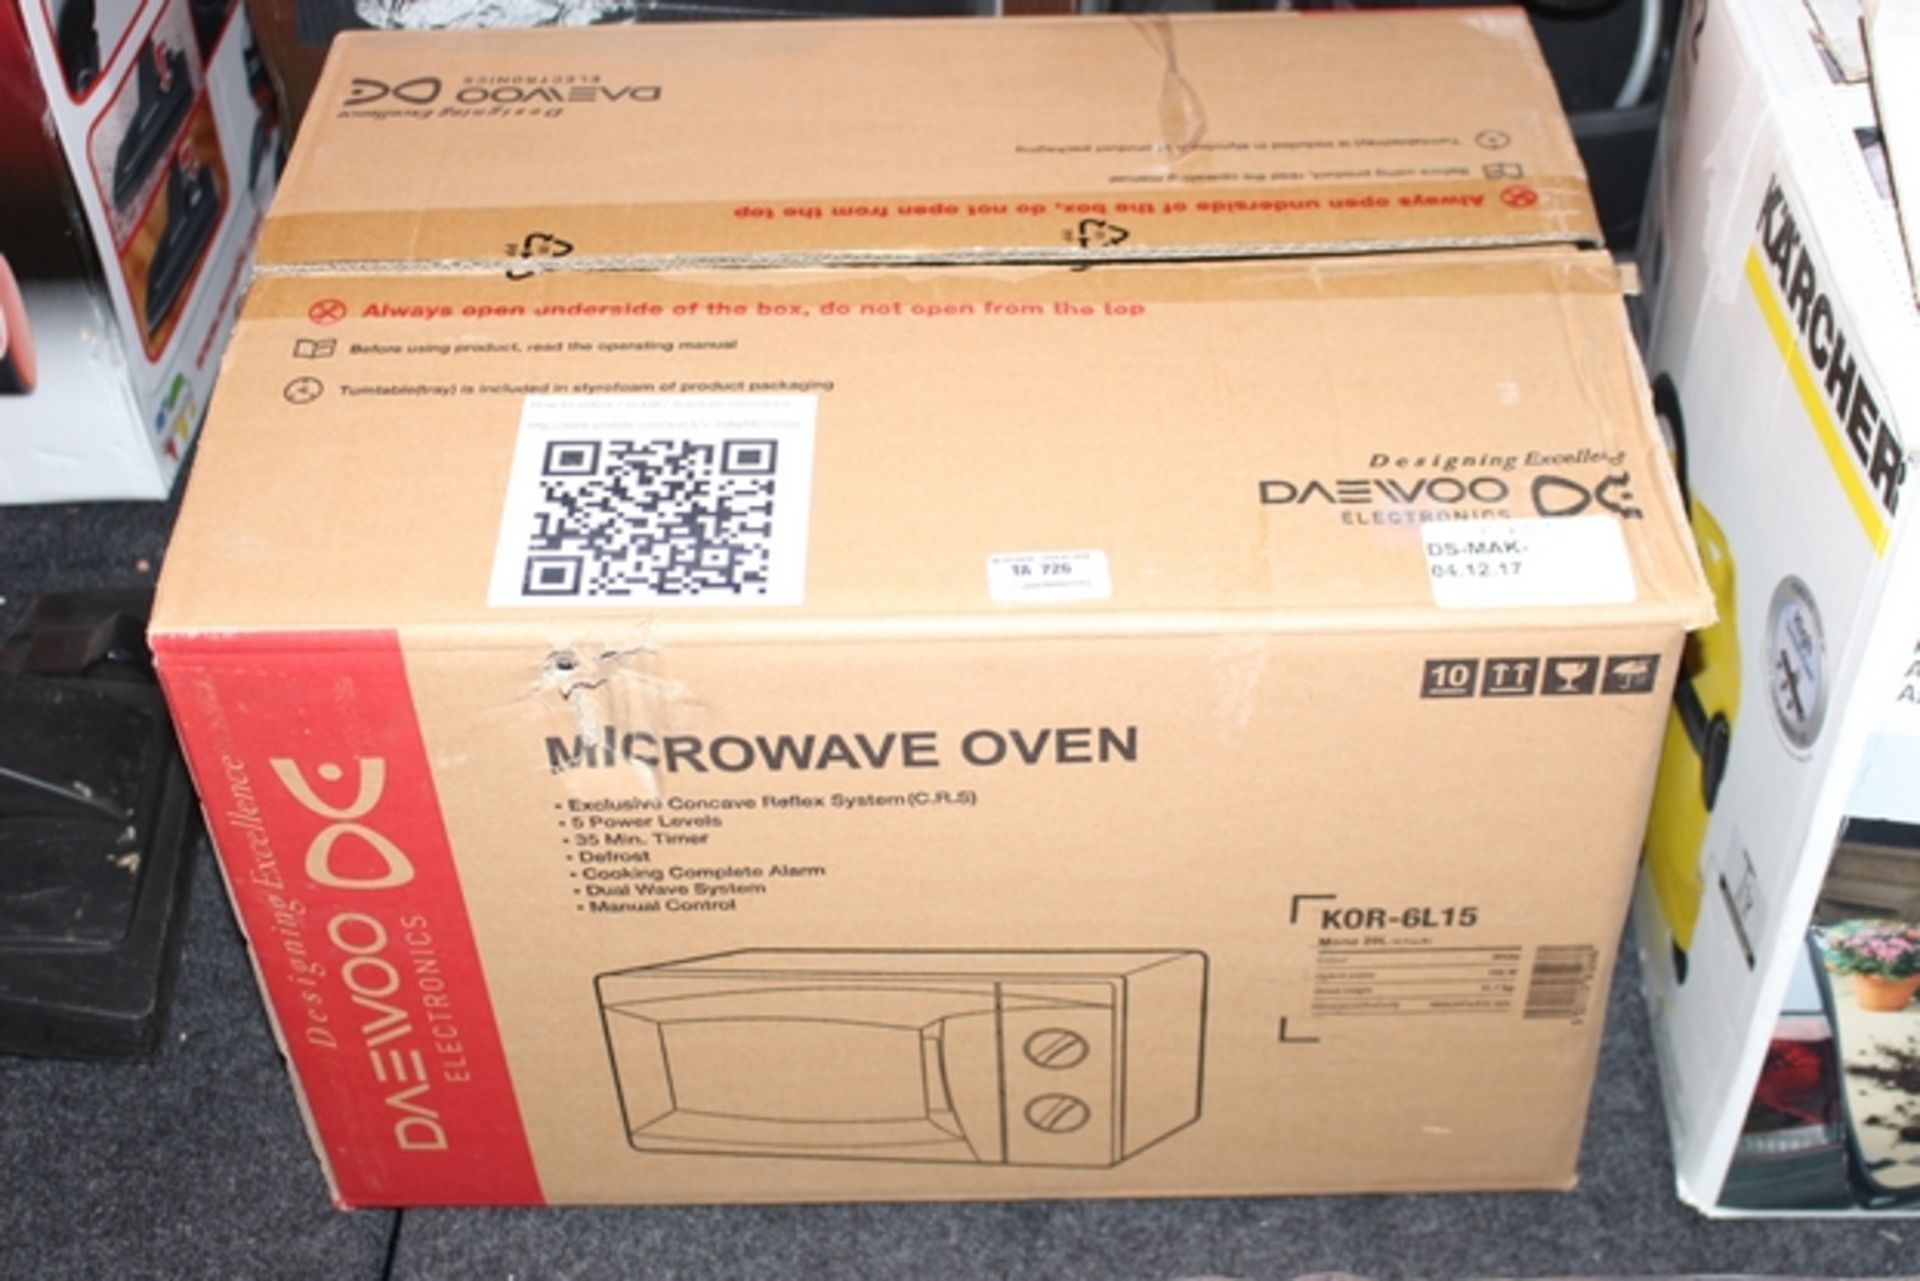 1X BOXED DAEWOO MICROWAVE OVEN (DS-MAK-PORT) (04/12/17)